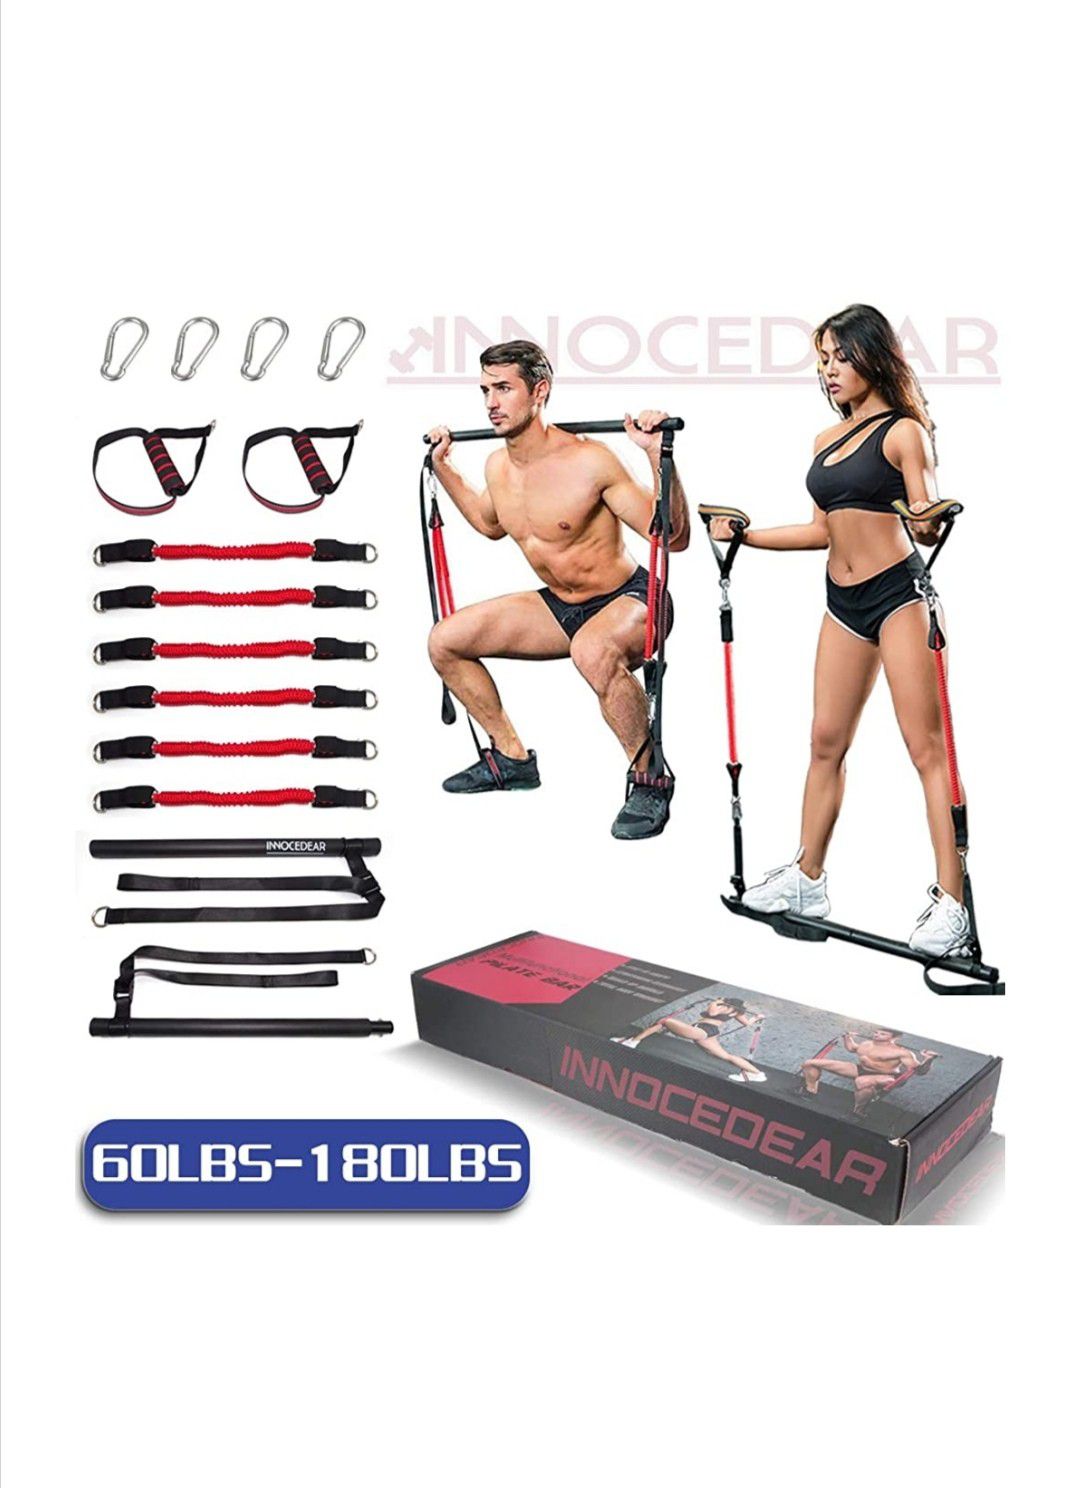 Home Gym Bar Kit with Resistance Bands,Portable Gym Full Body Workout,60-180LBS Adjustable Pilates Bar System,Safe Exercise Weight Set,-